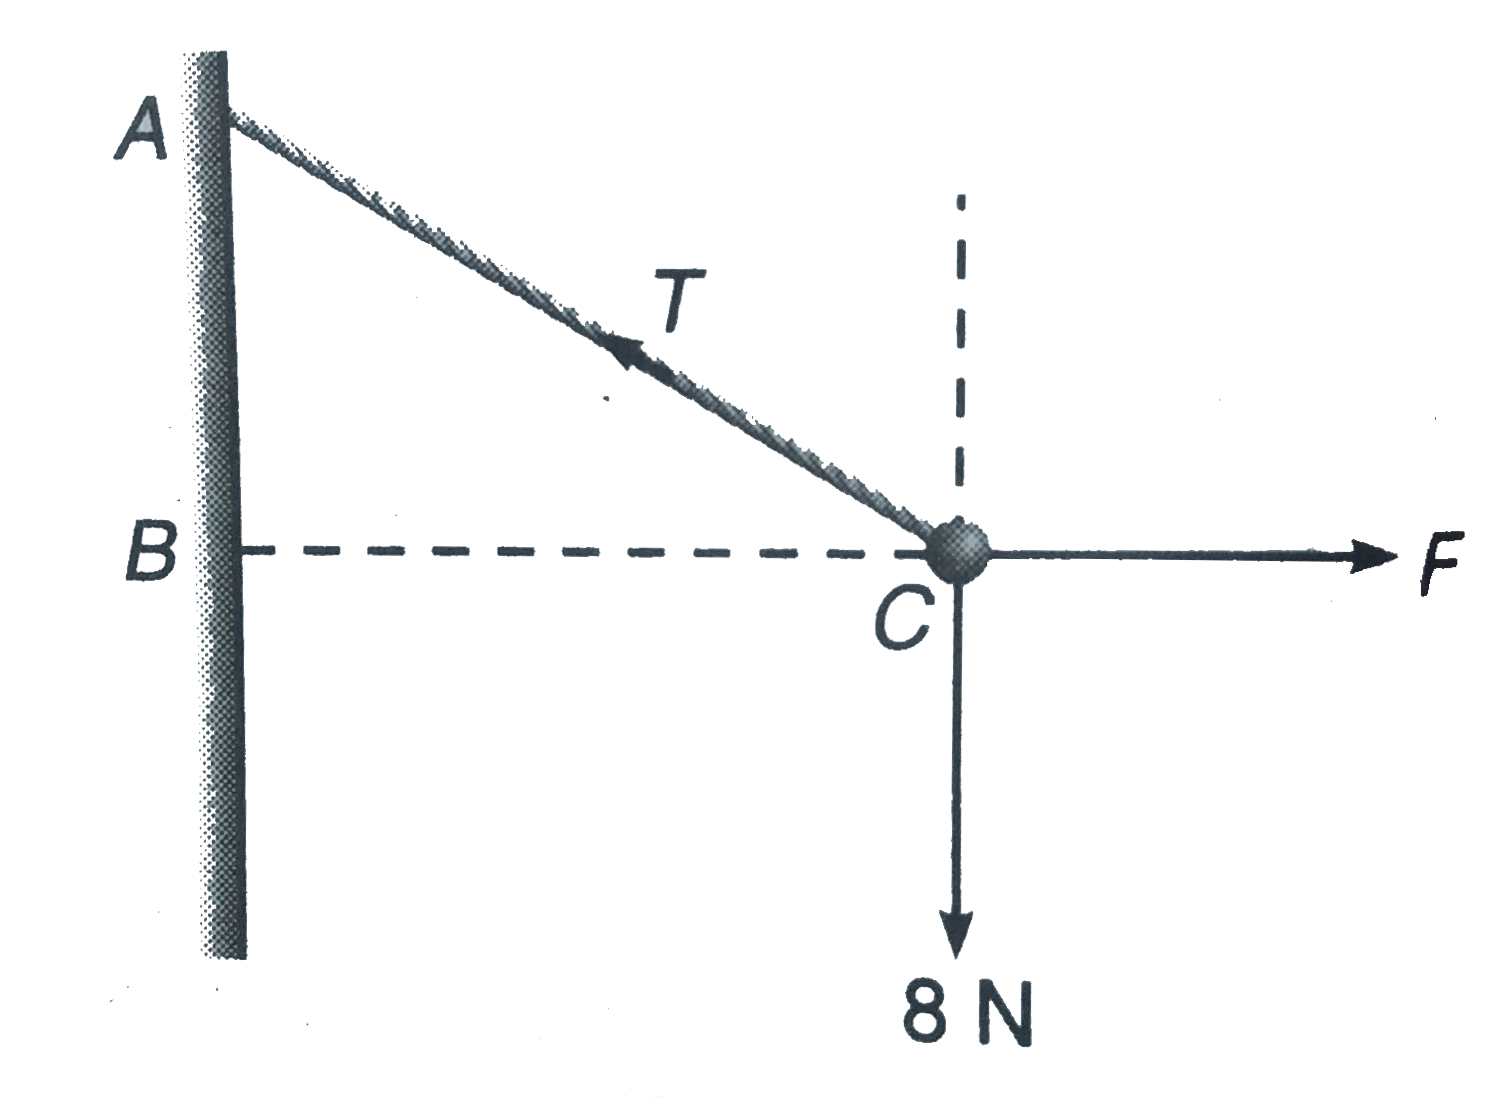 One end of a string 0.5 m long is fixed to a point A and the other end is fastened to a small object of weight 8 N. The object is pulled aside by a horizontal force F, until it is 0.3 m from the vertical through A. Find the magnitudes of the tension T in the string and force F.